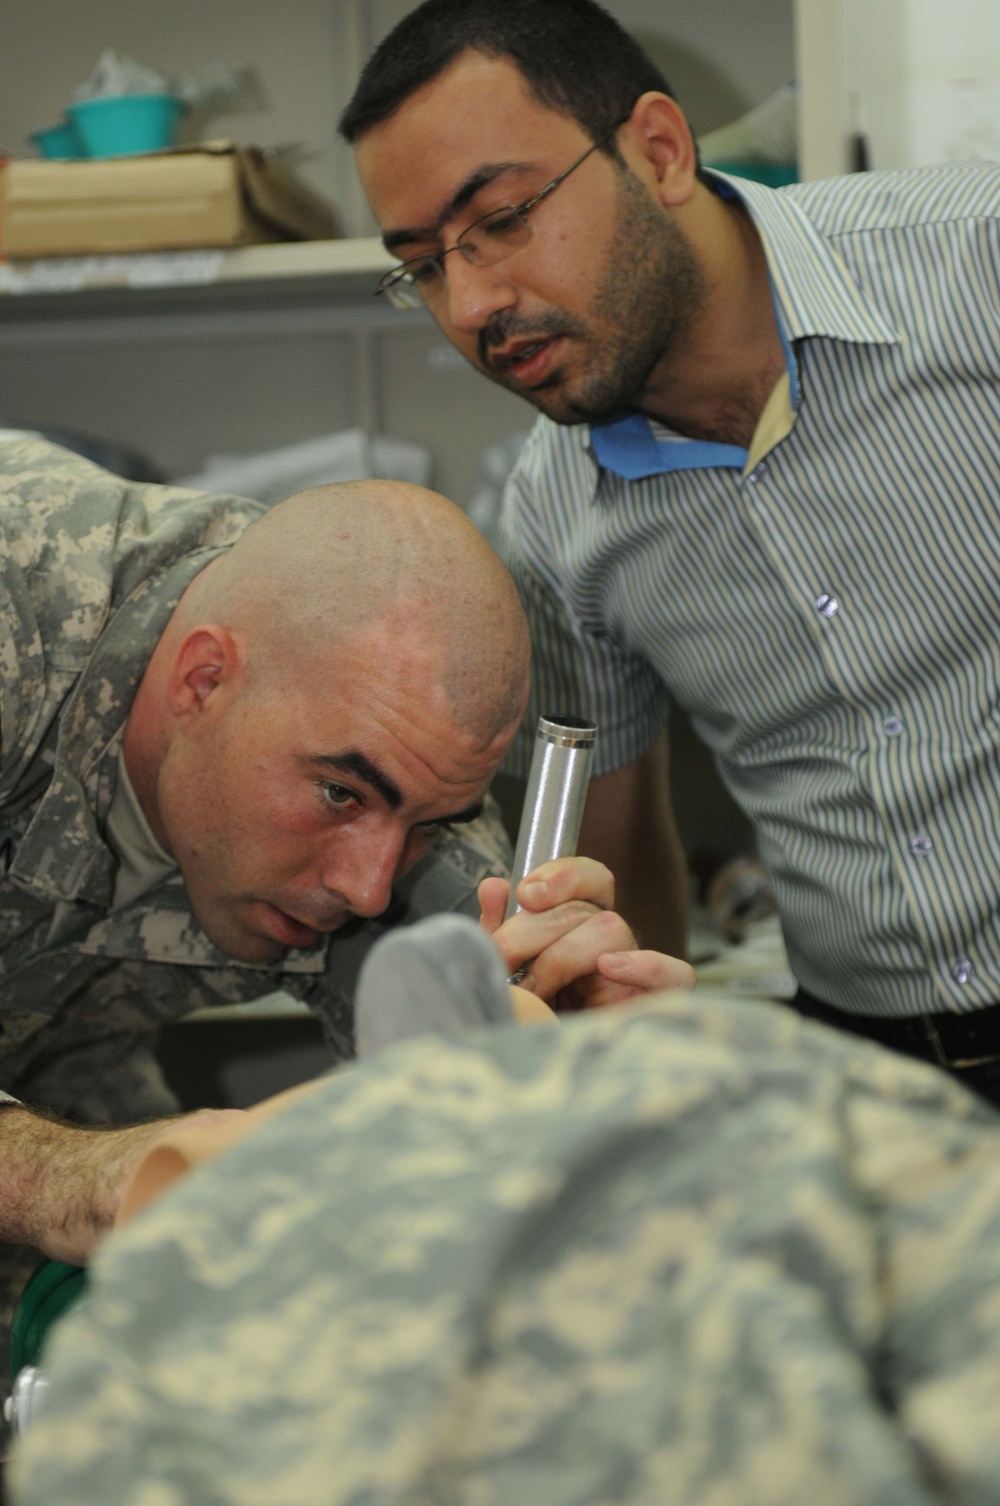 Program offers Iraqi doctors hands-on training with USD-C partners